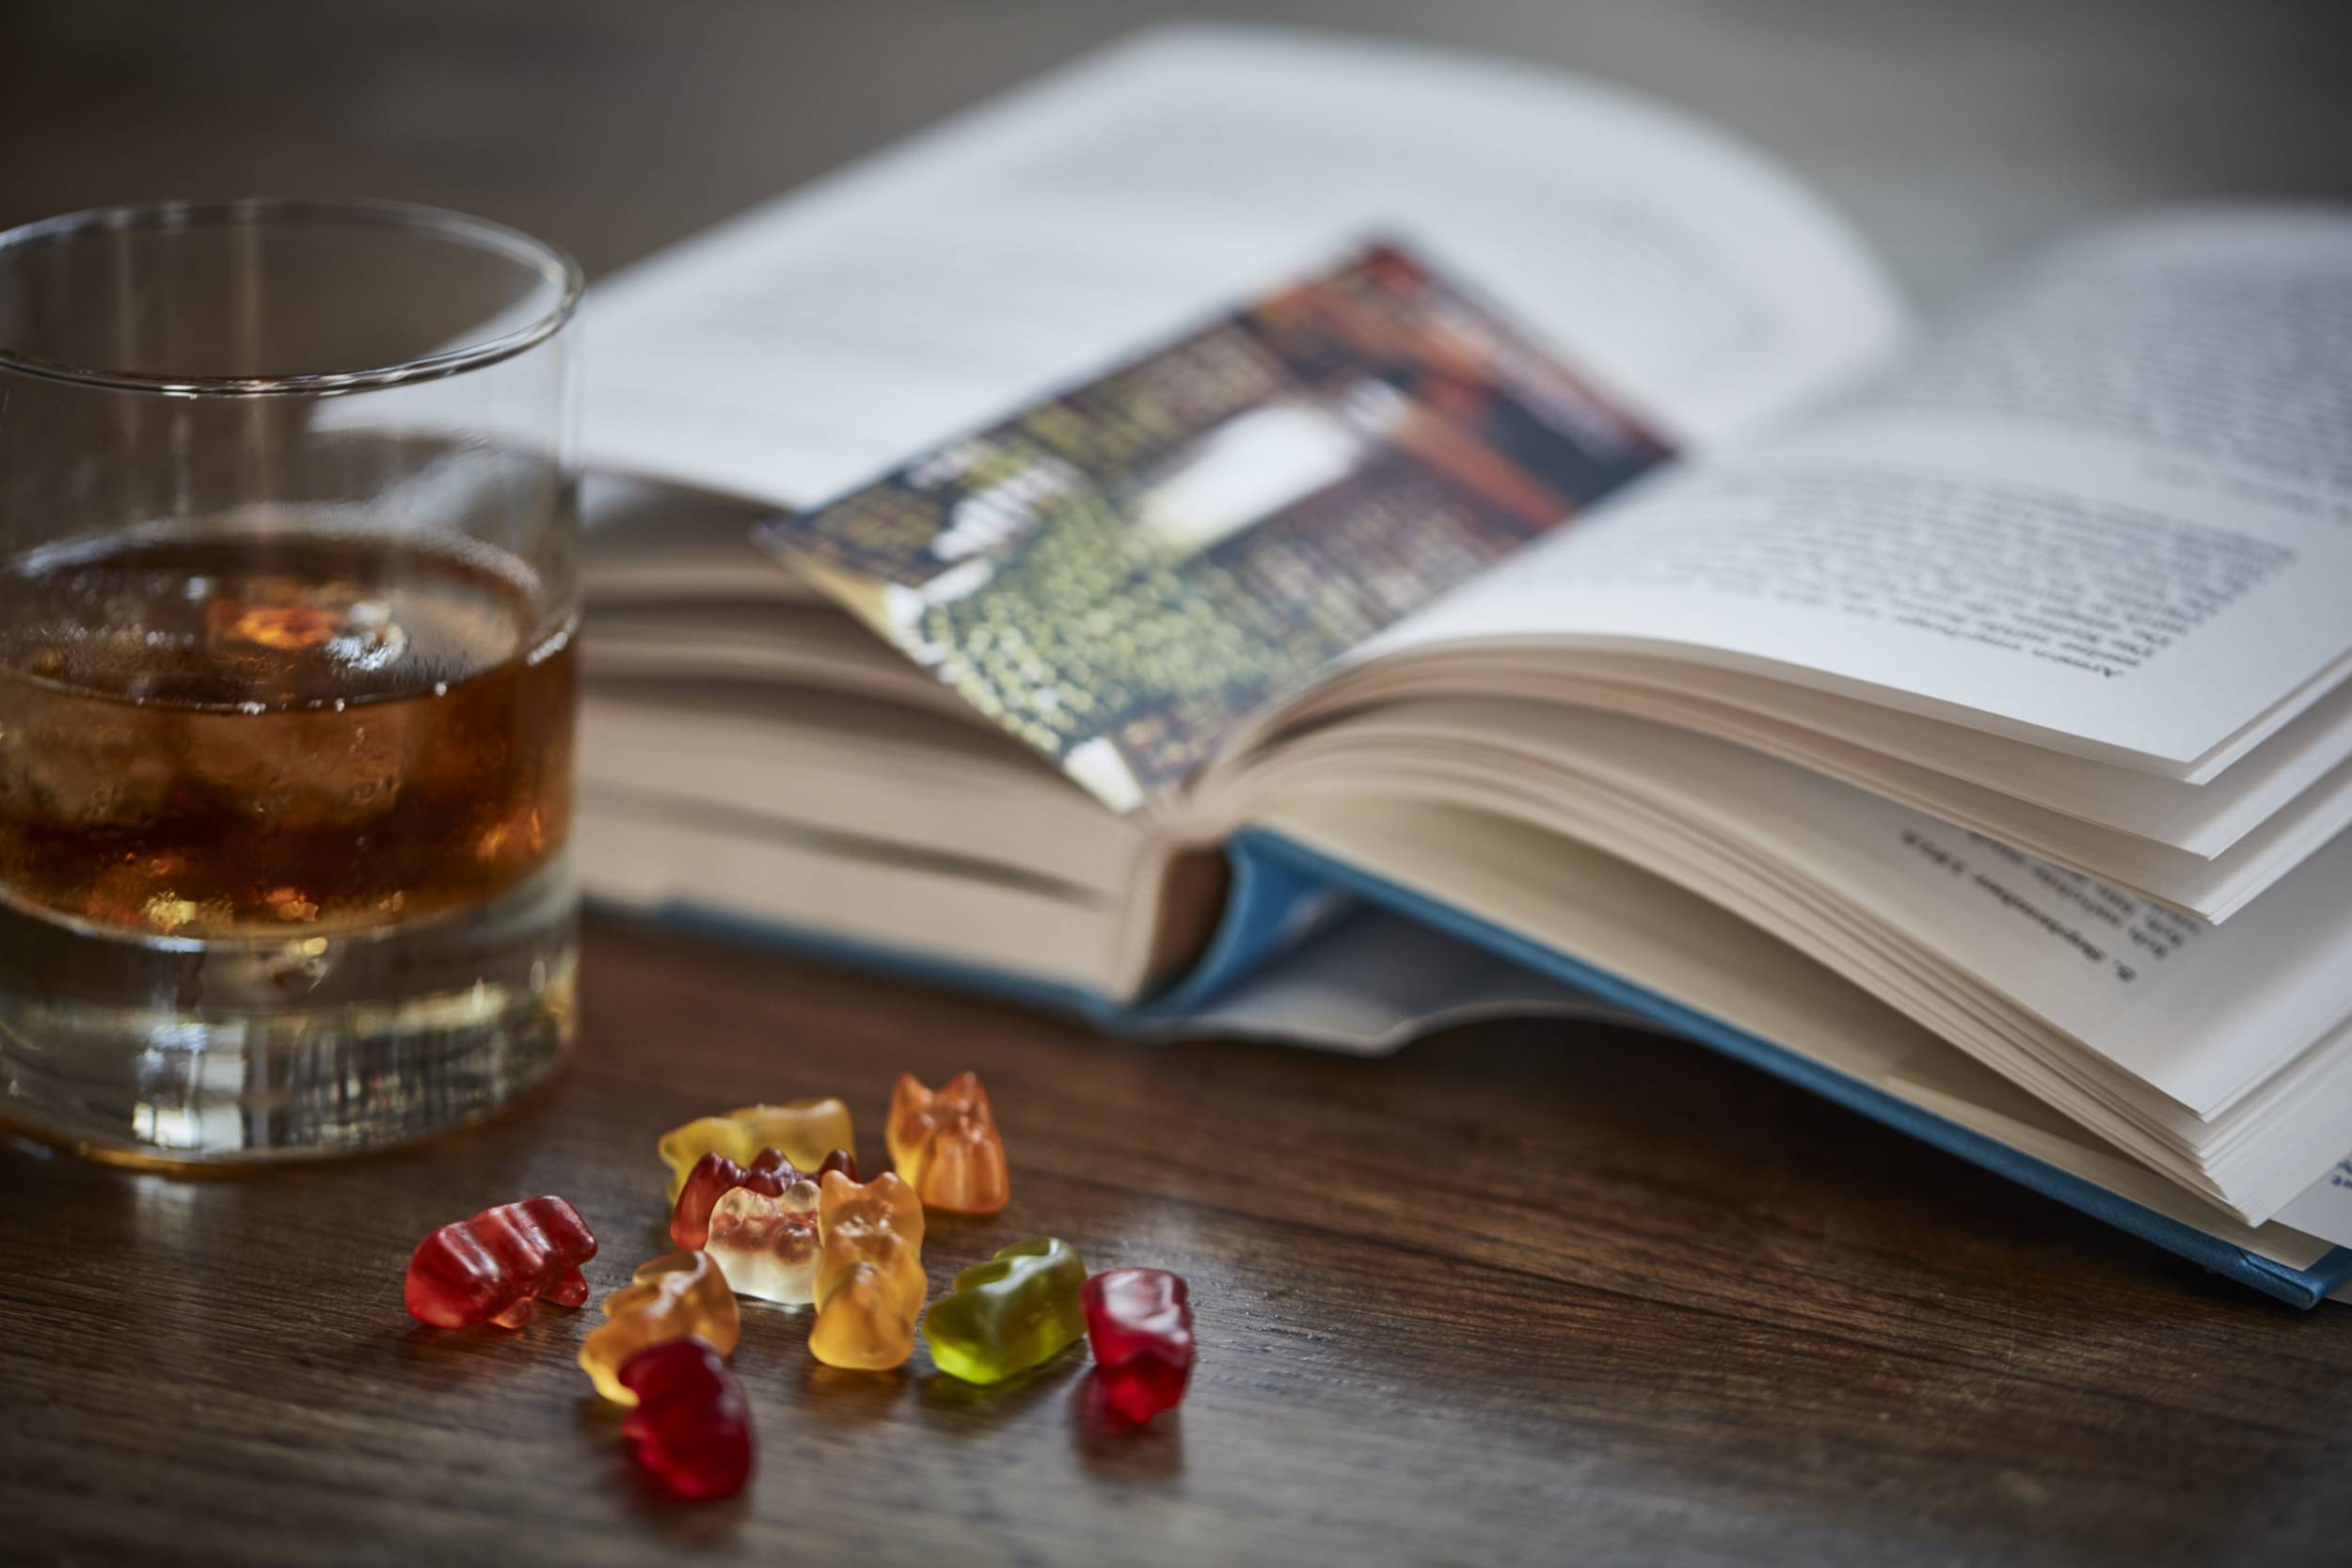 Drink on the table with a book and gummy bears